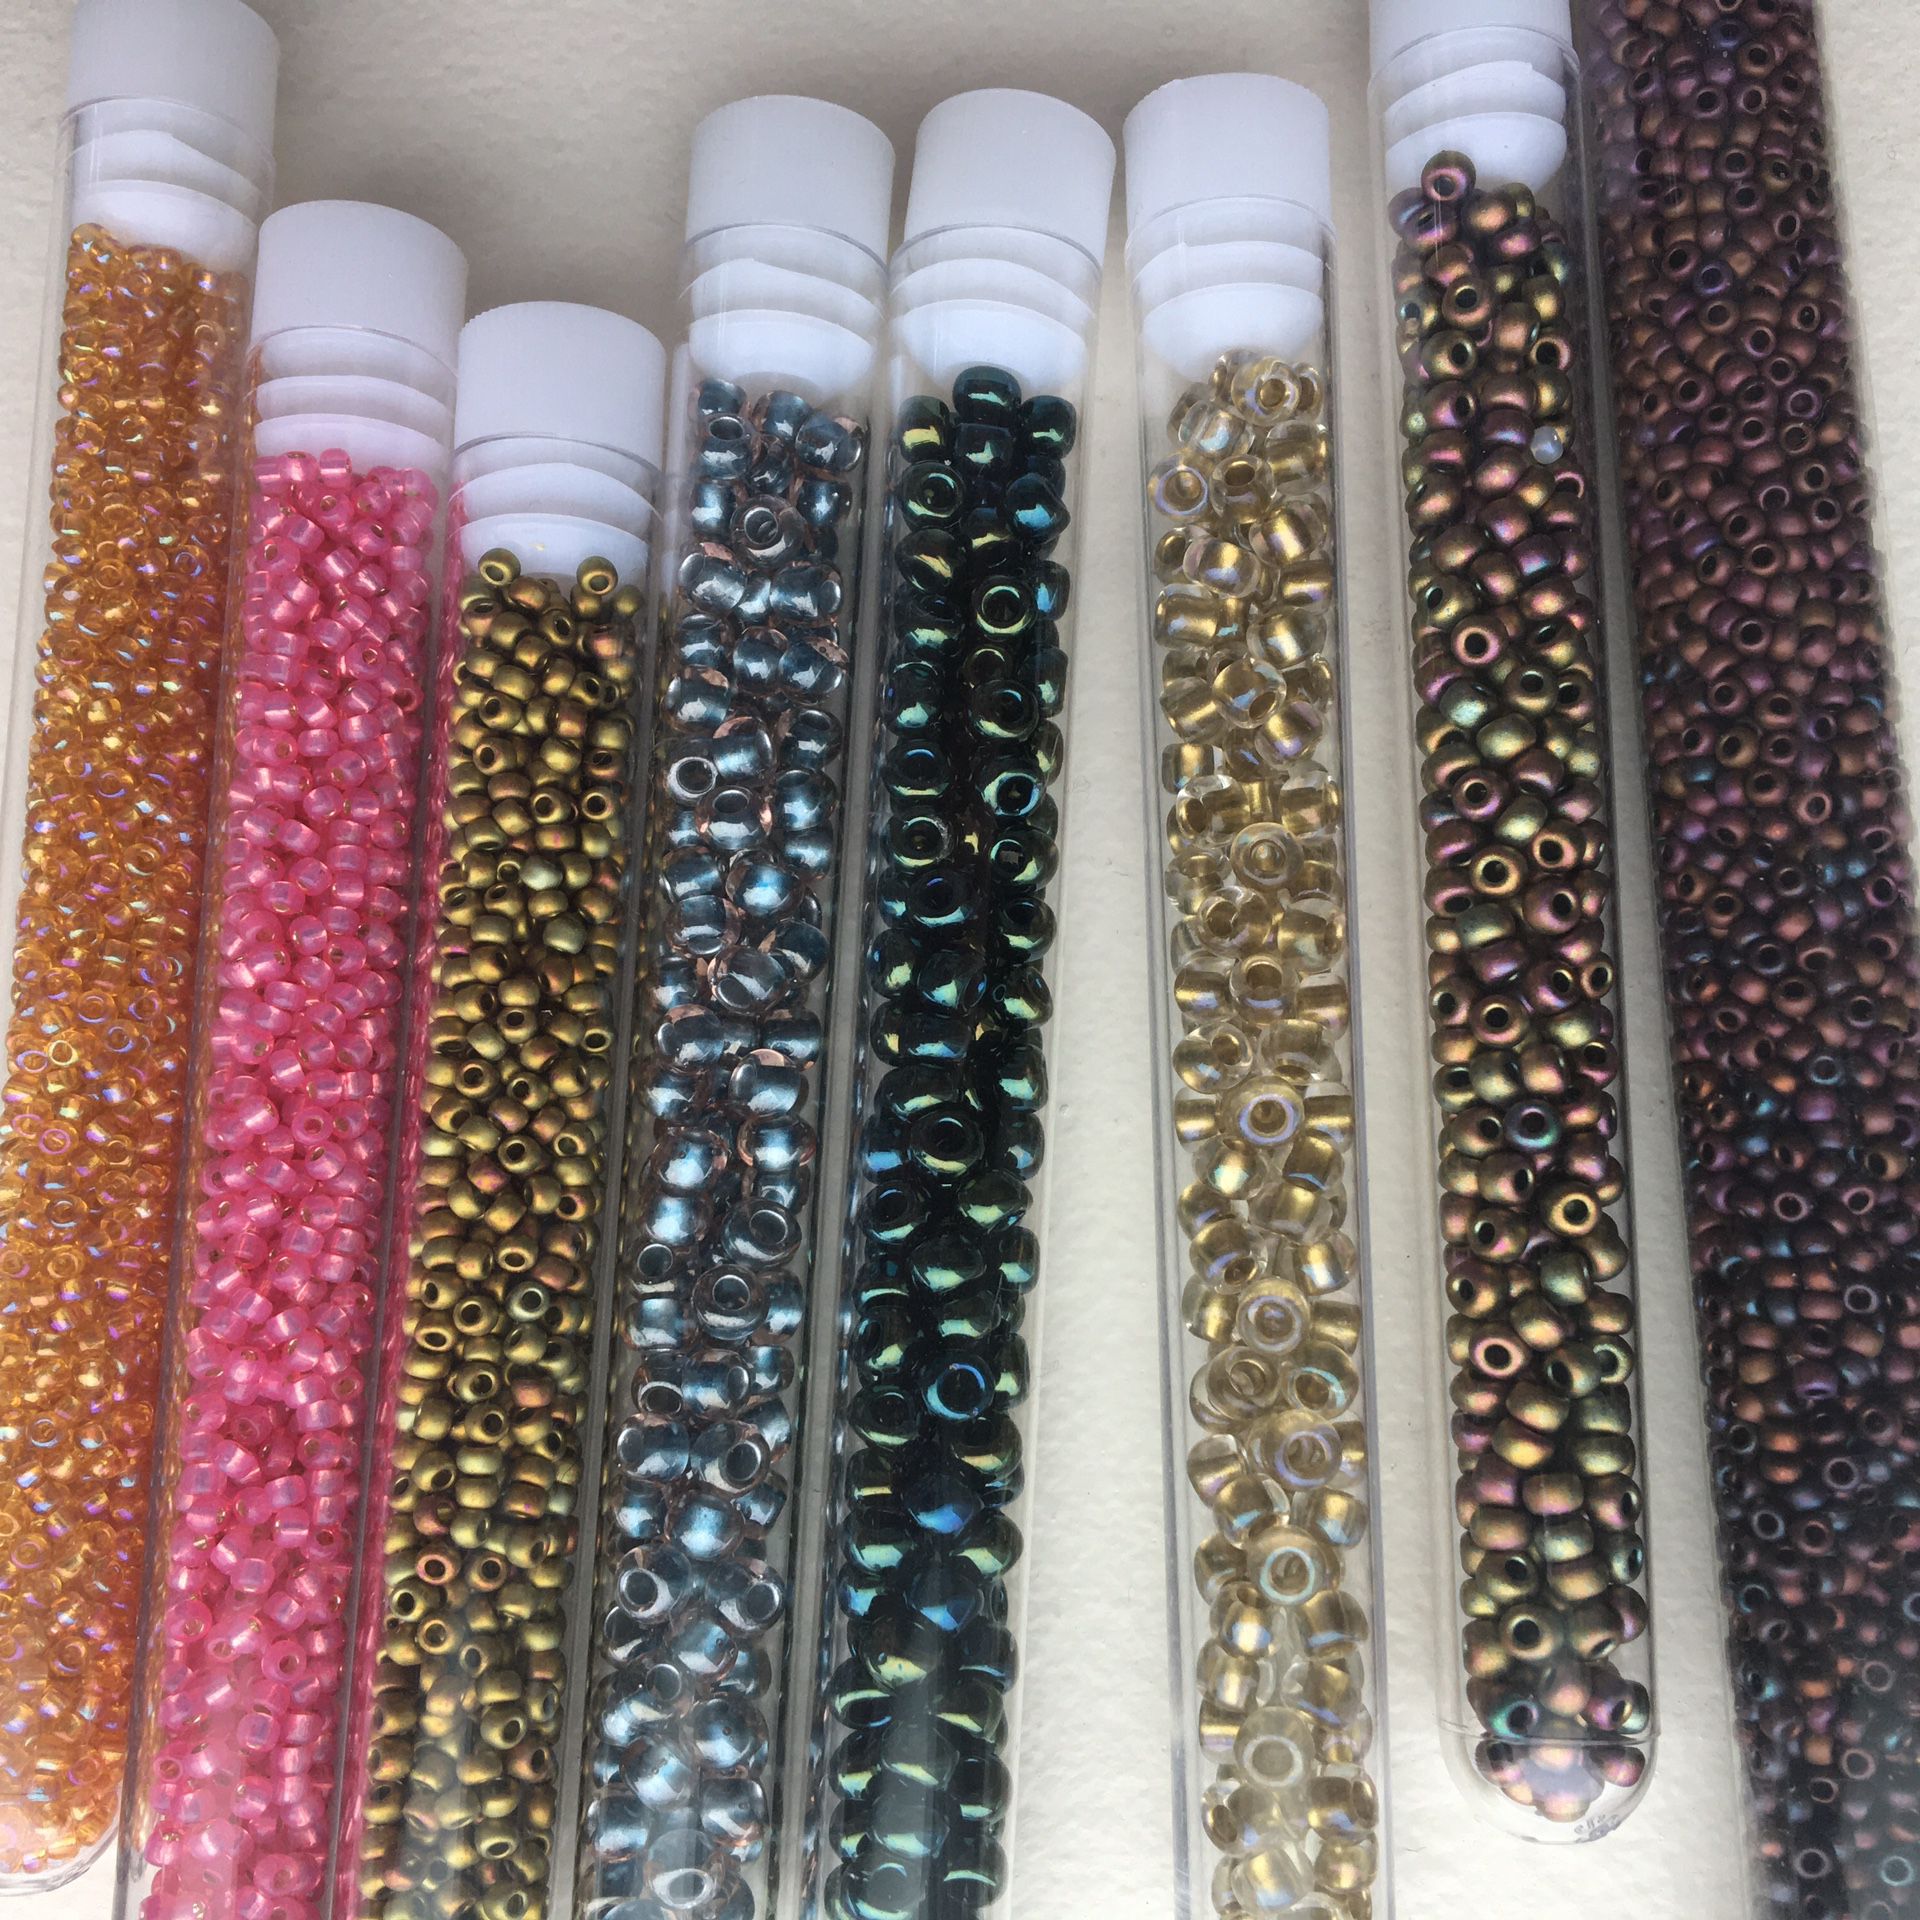 Glass Seed Beads In Vials Size 11/0, 8/0, 6/0 #E19